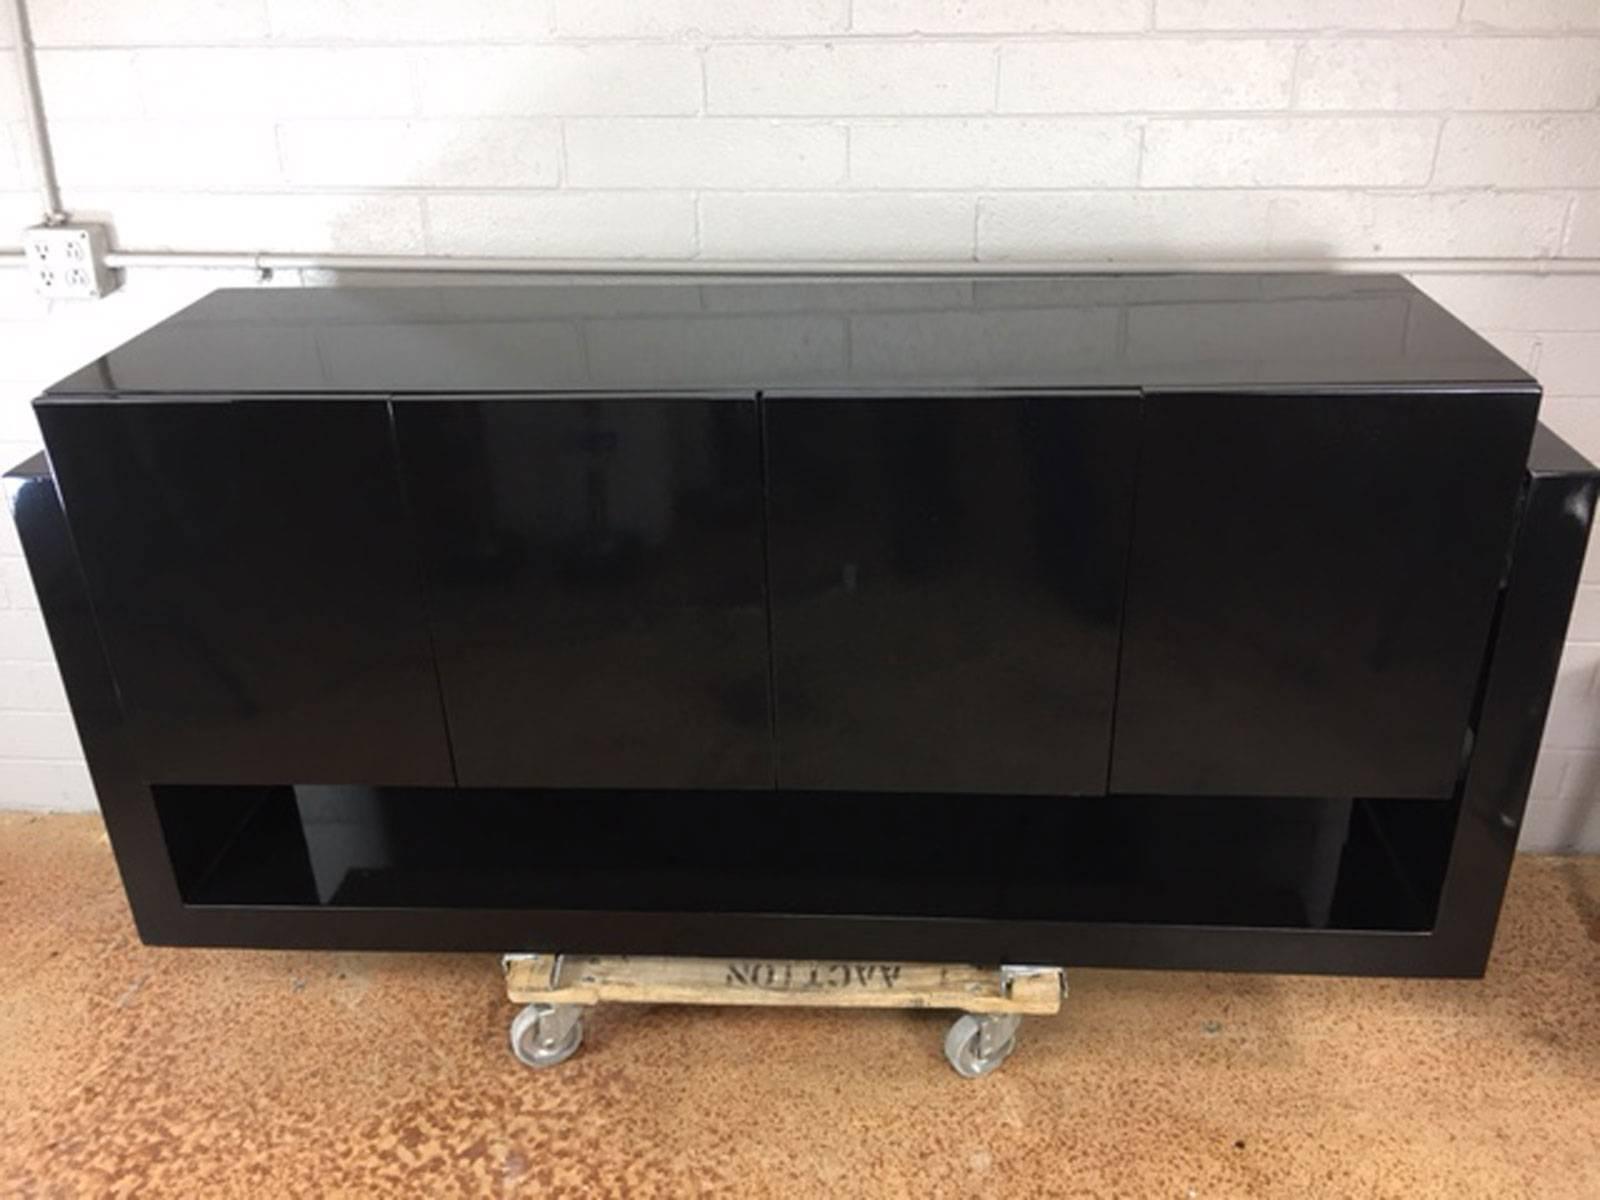 Floating illuminated credenza suspended with Lucite joints on a high gloss black lacquered support base. This credenza is illuminated from underneath the cabinets with two different lights which provides a very warm glow.